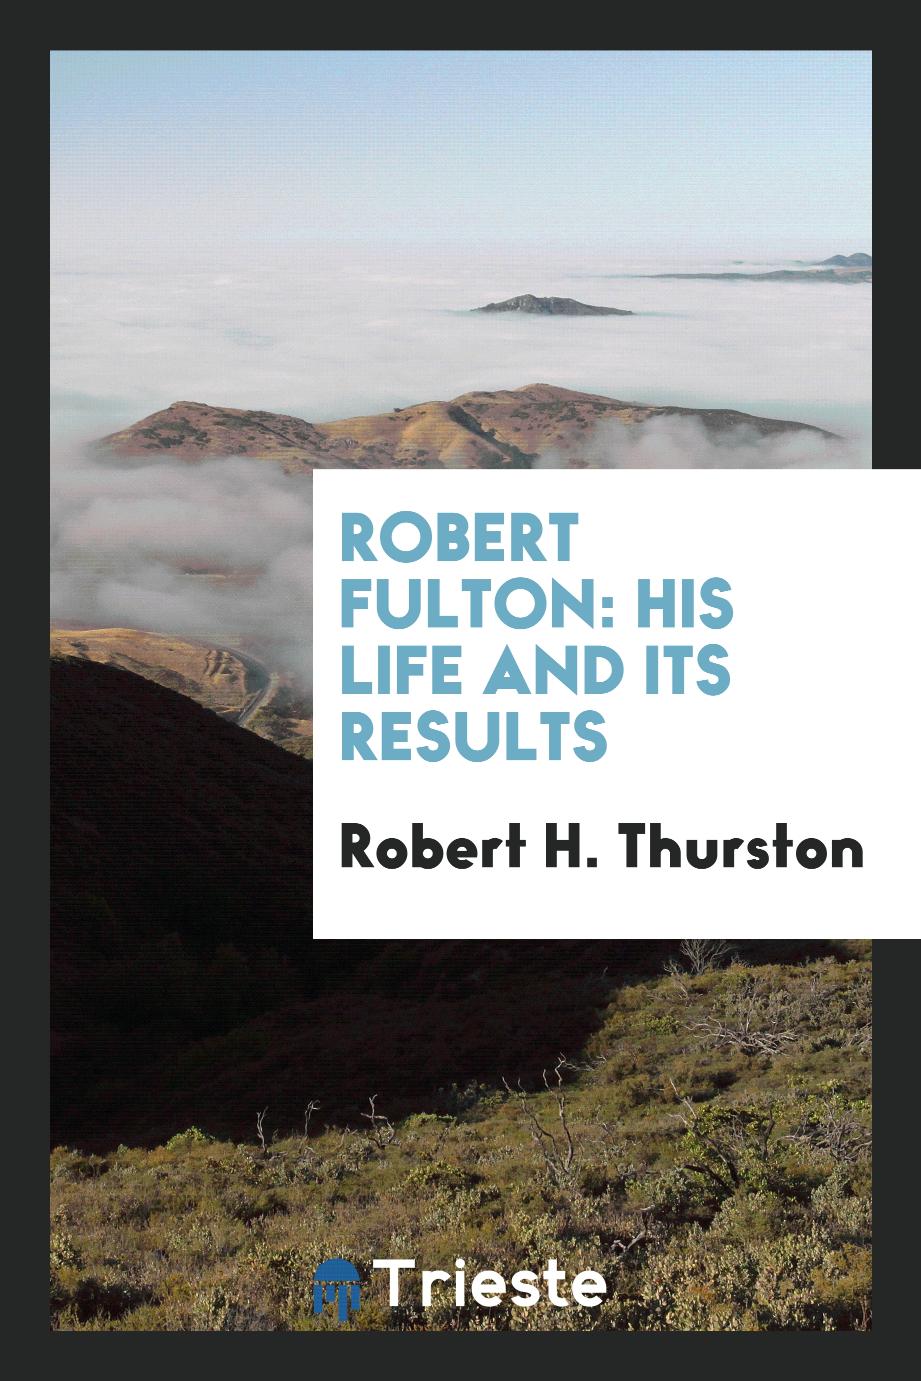 Robert Fulton: his life and its results